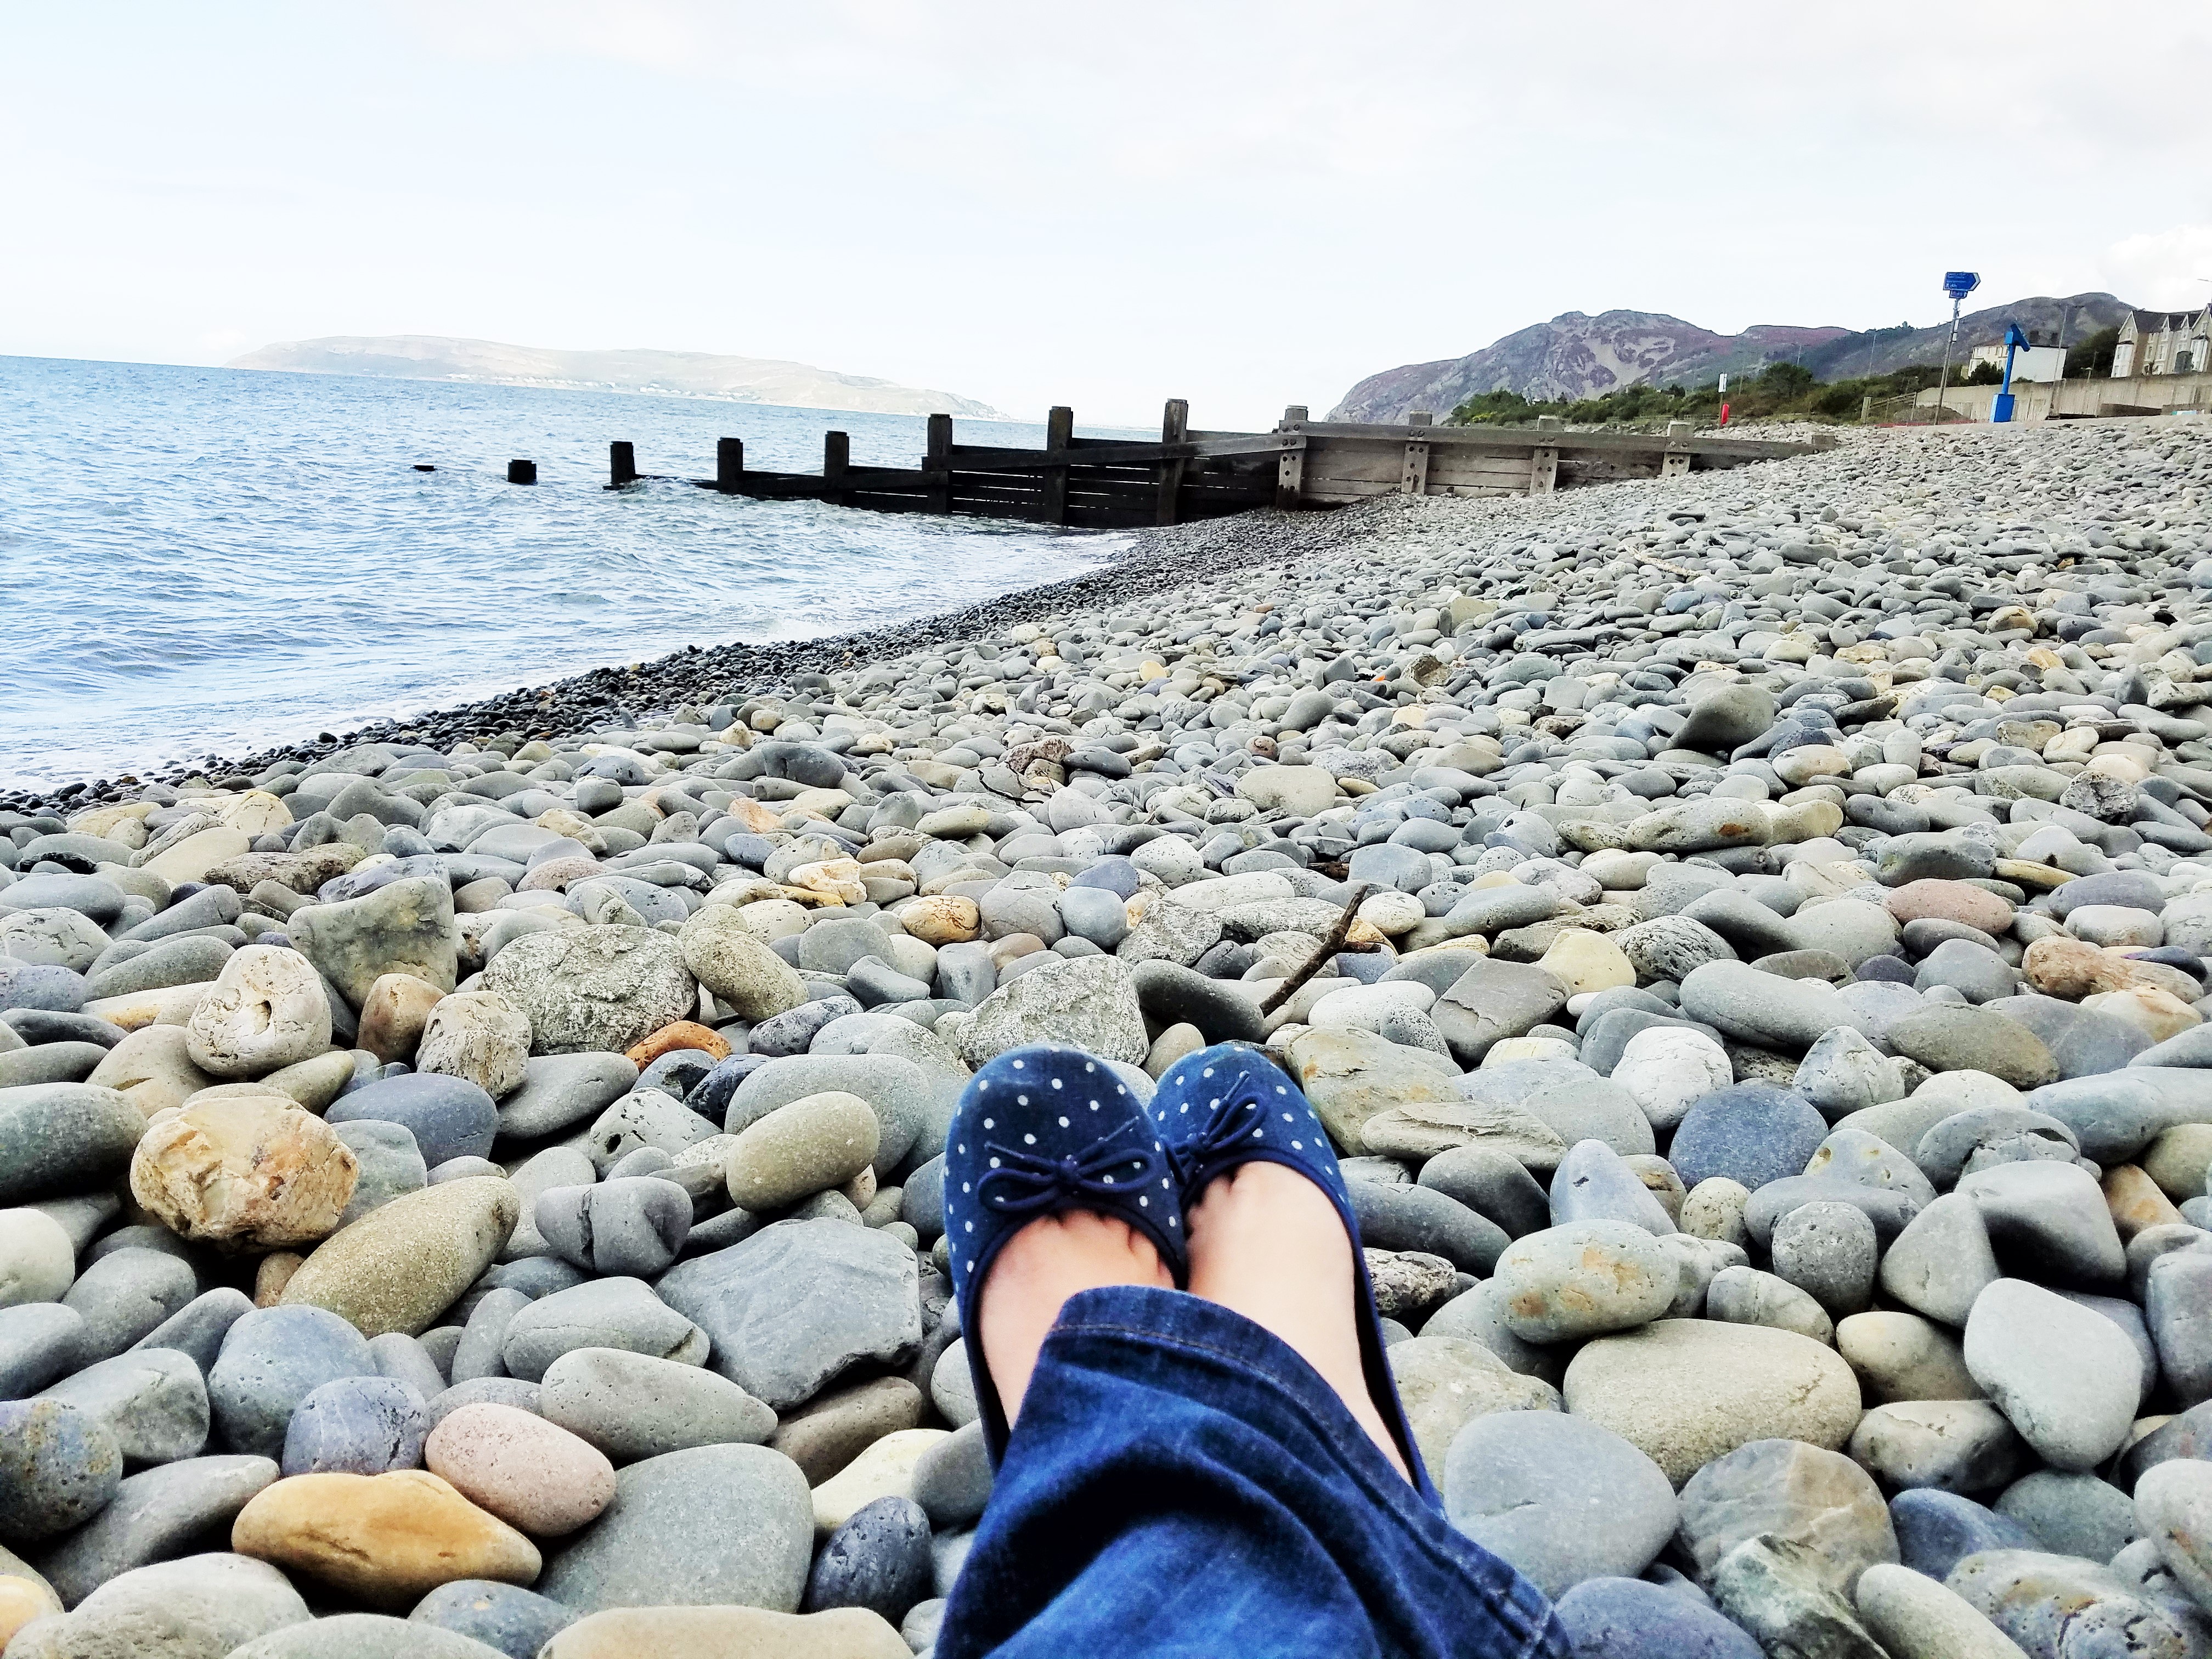 My superpower is being sensitive - sitting on a stony beach - blogcrush week 35